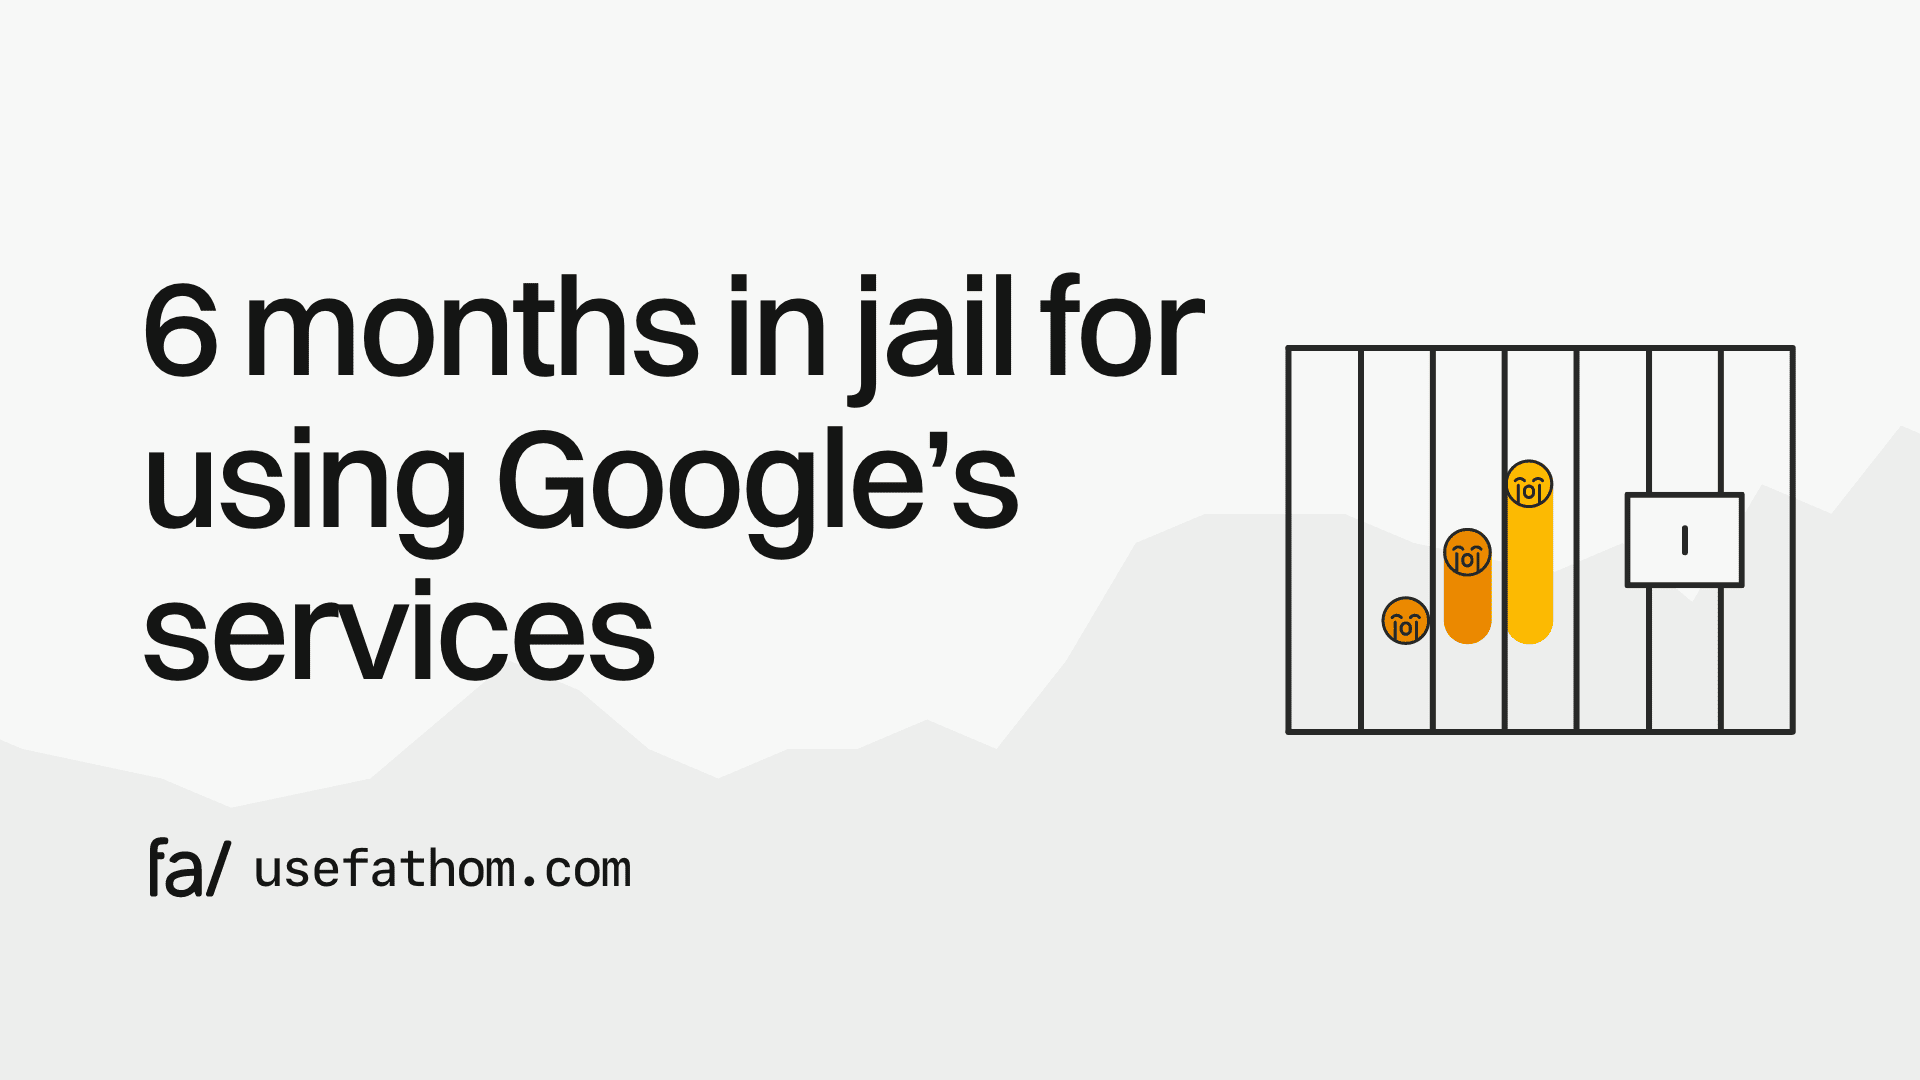 Denmark: 6 months in jail for using Google’s services